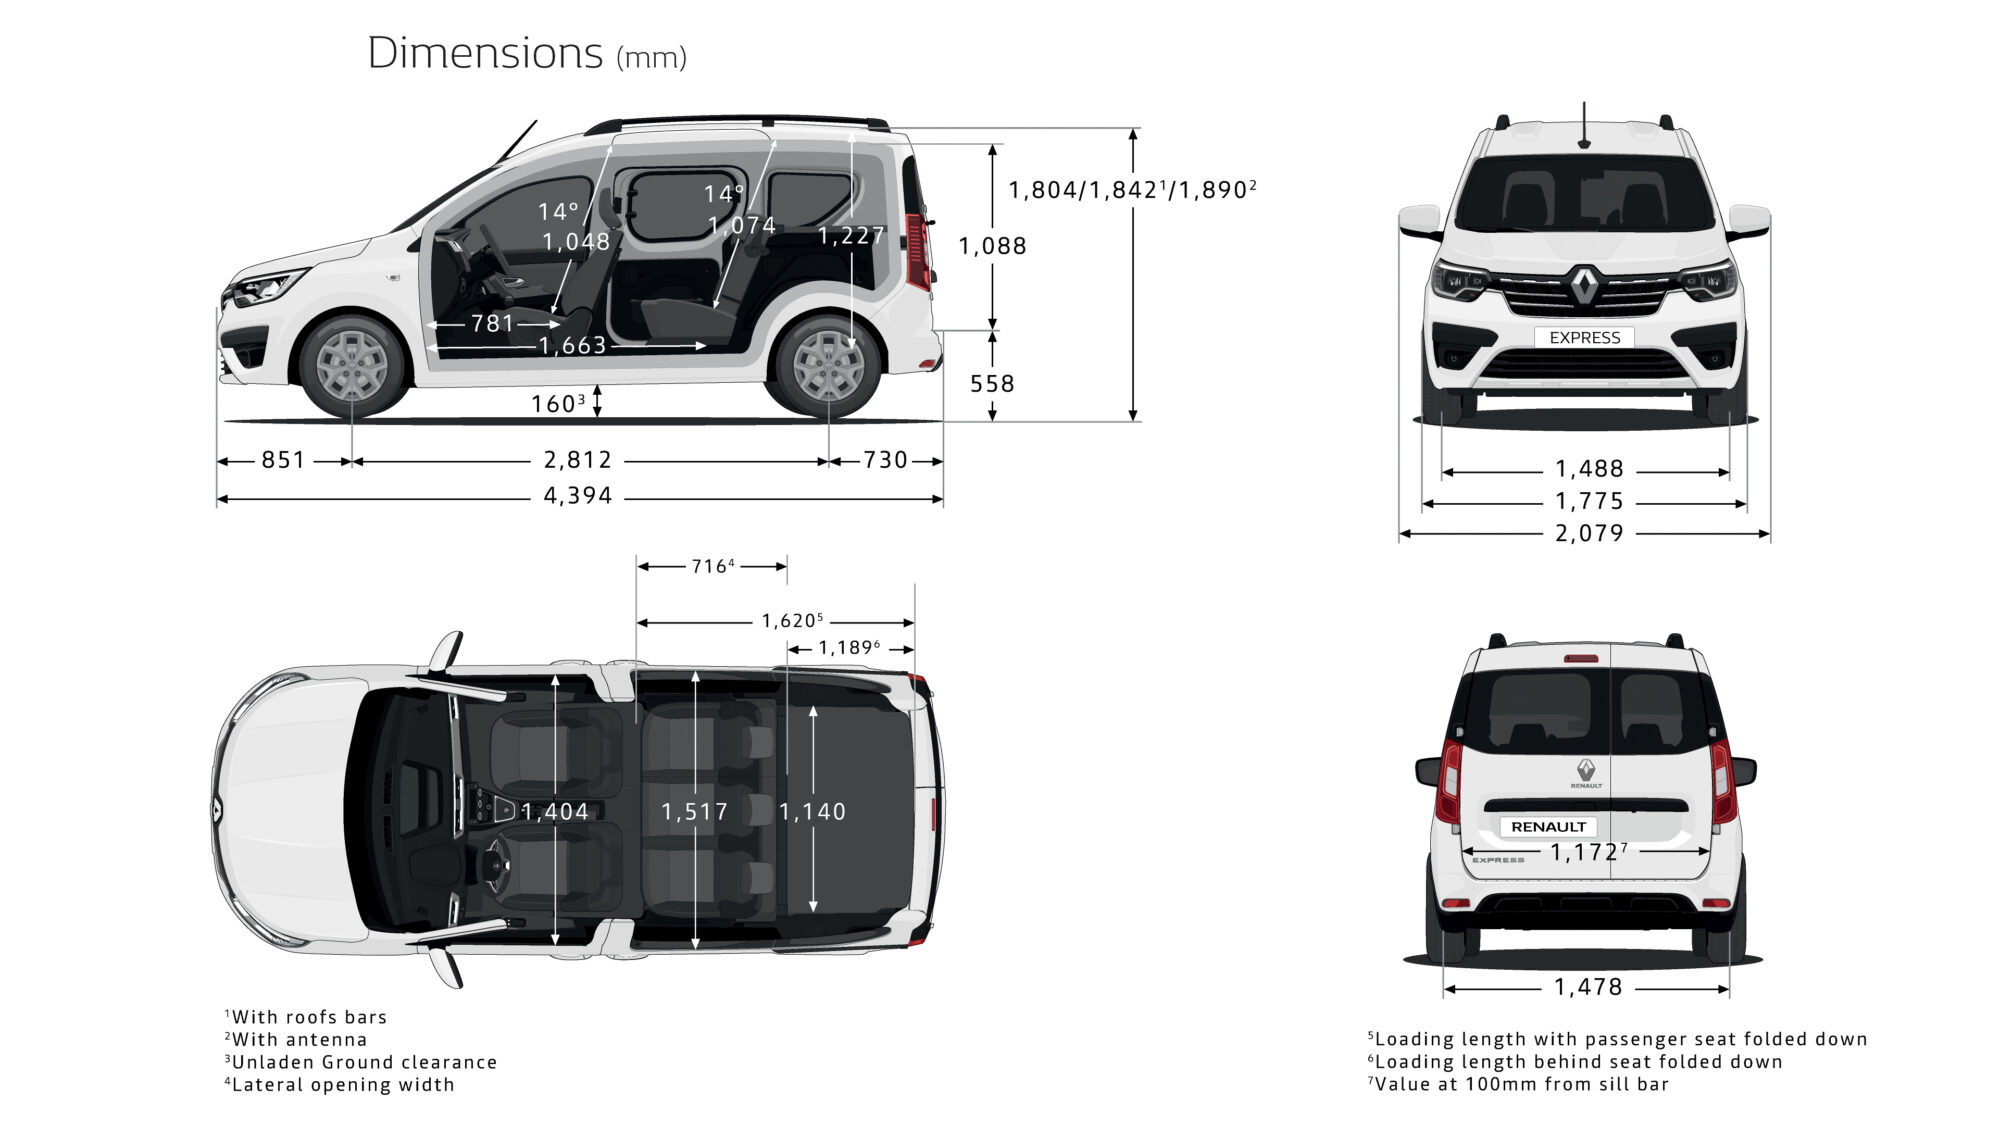 2021 - New Renault Express - Technical Drawings